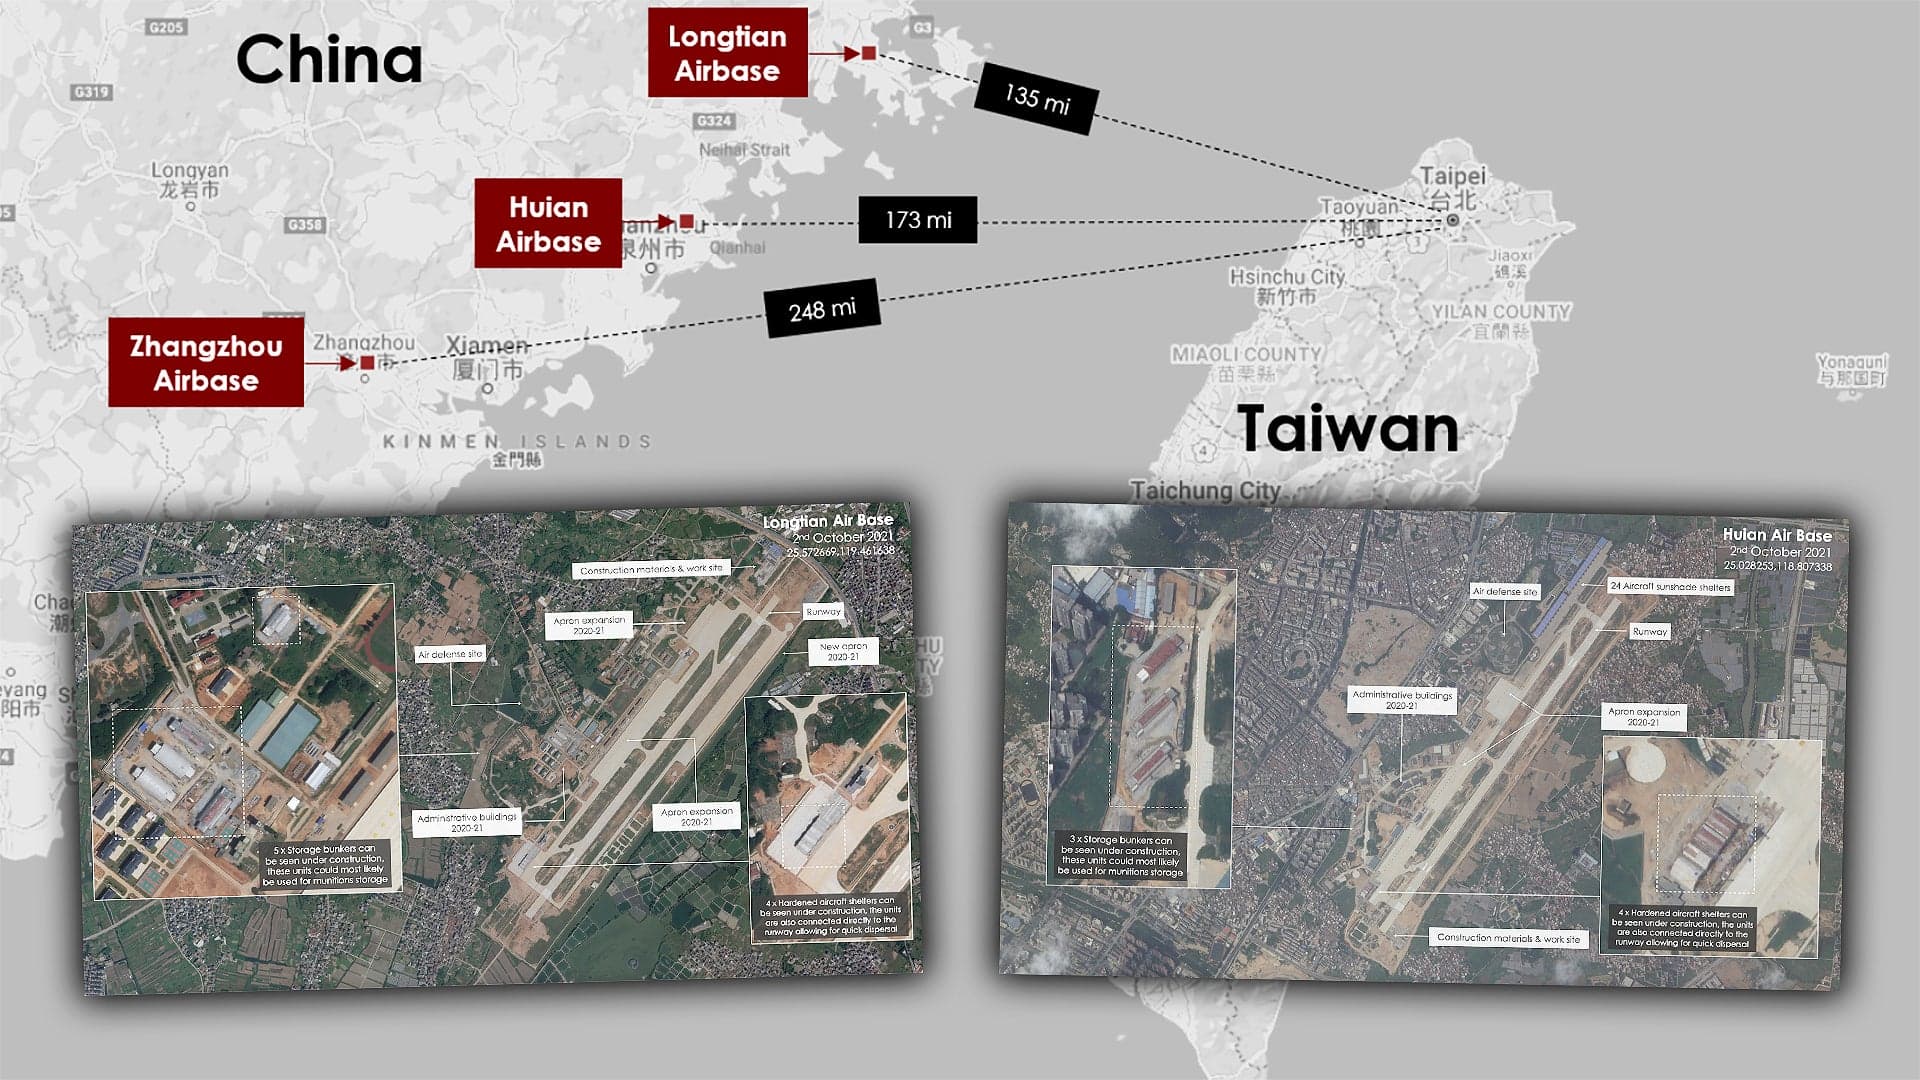 Major Construction Underway At Three Of China’s Airbases Closest To Taiwan